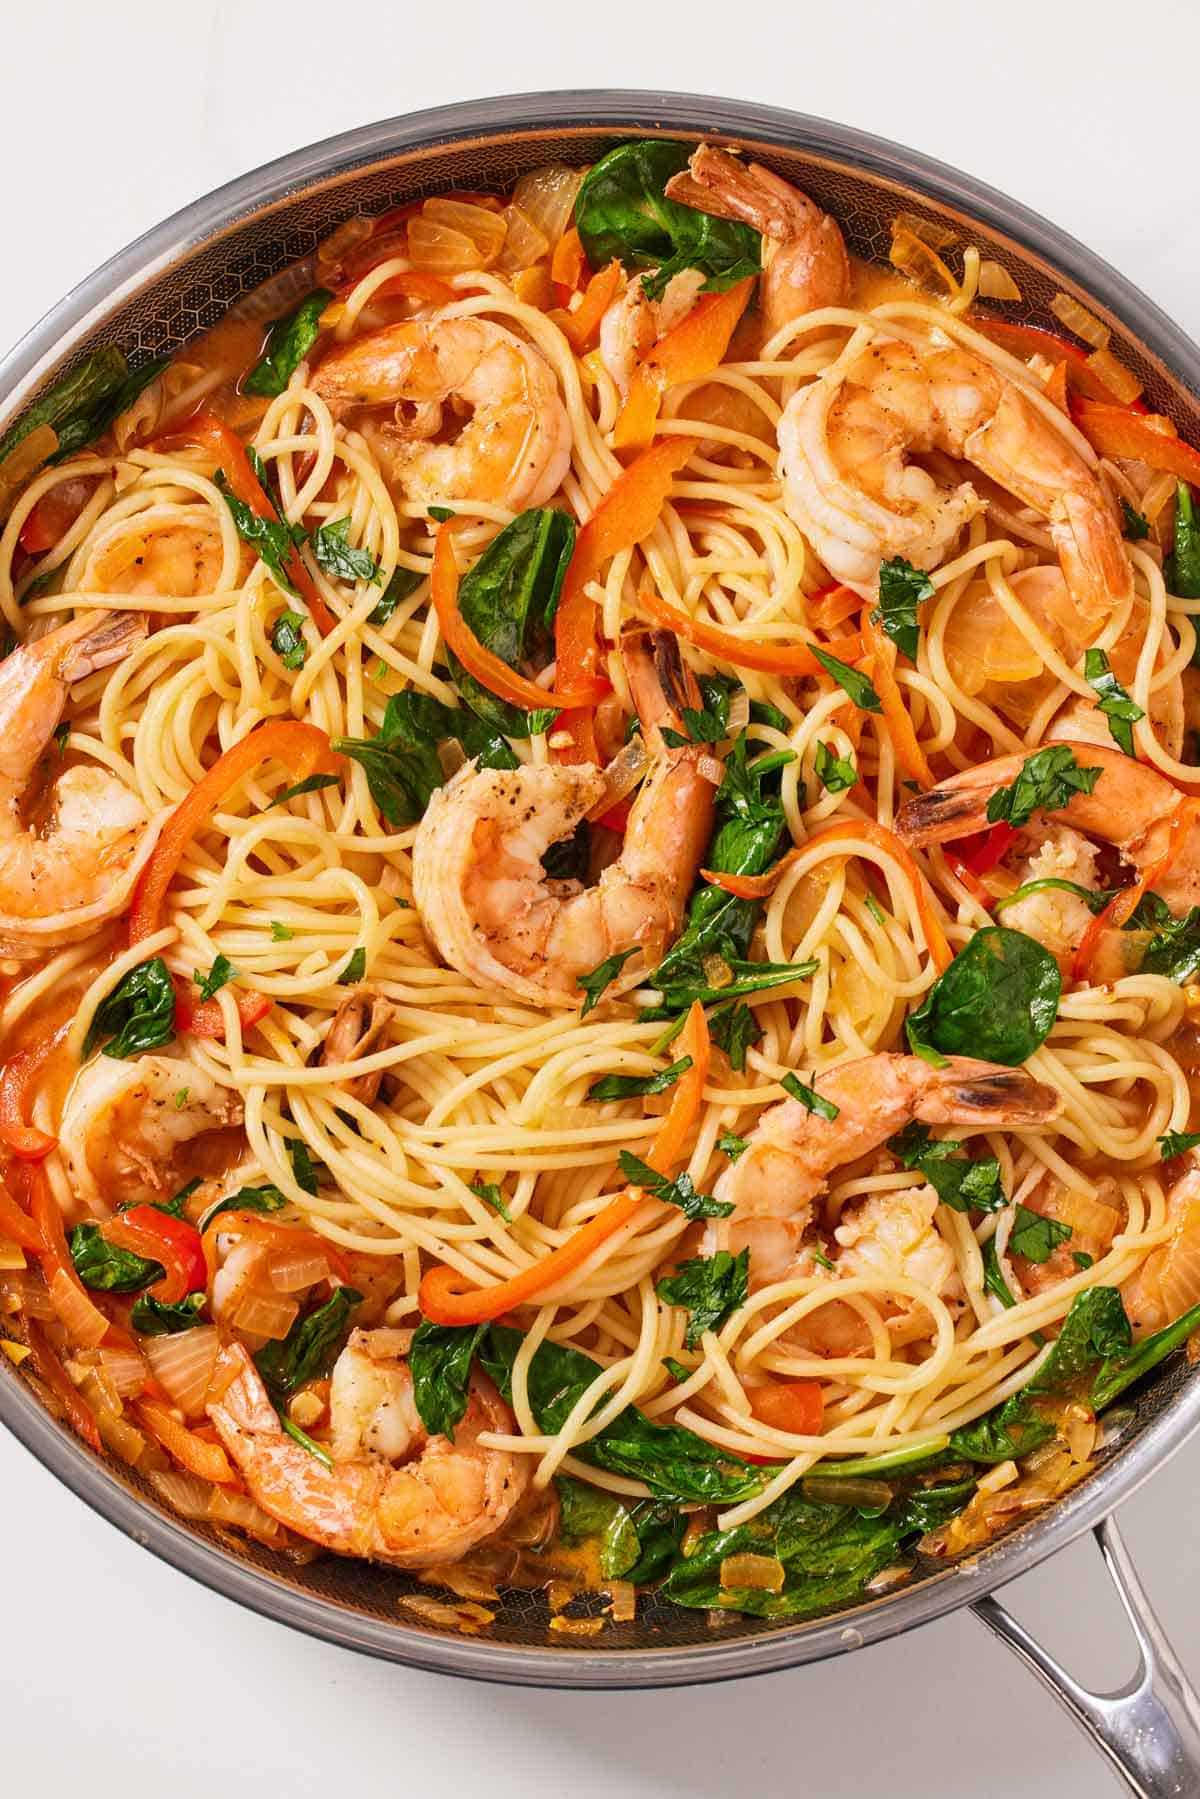 Overhead view of red curry pasta with shrimp inside of a stainless steel pan.